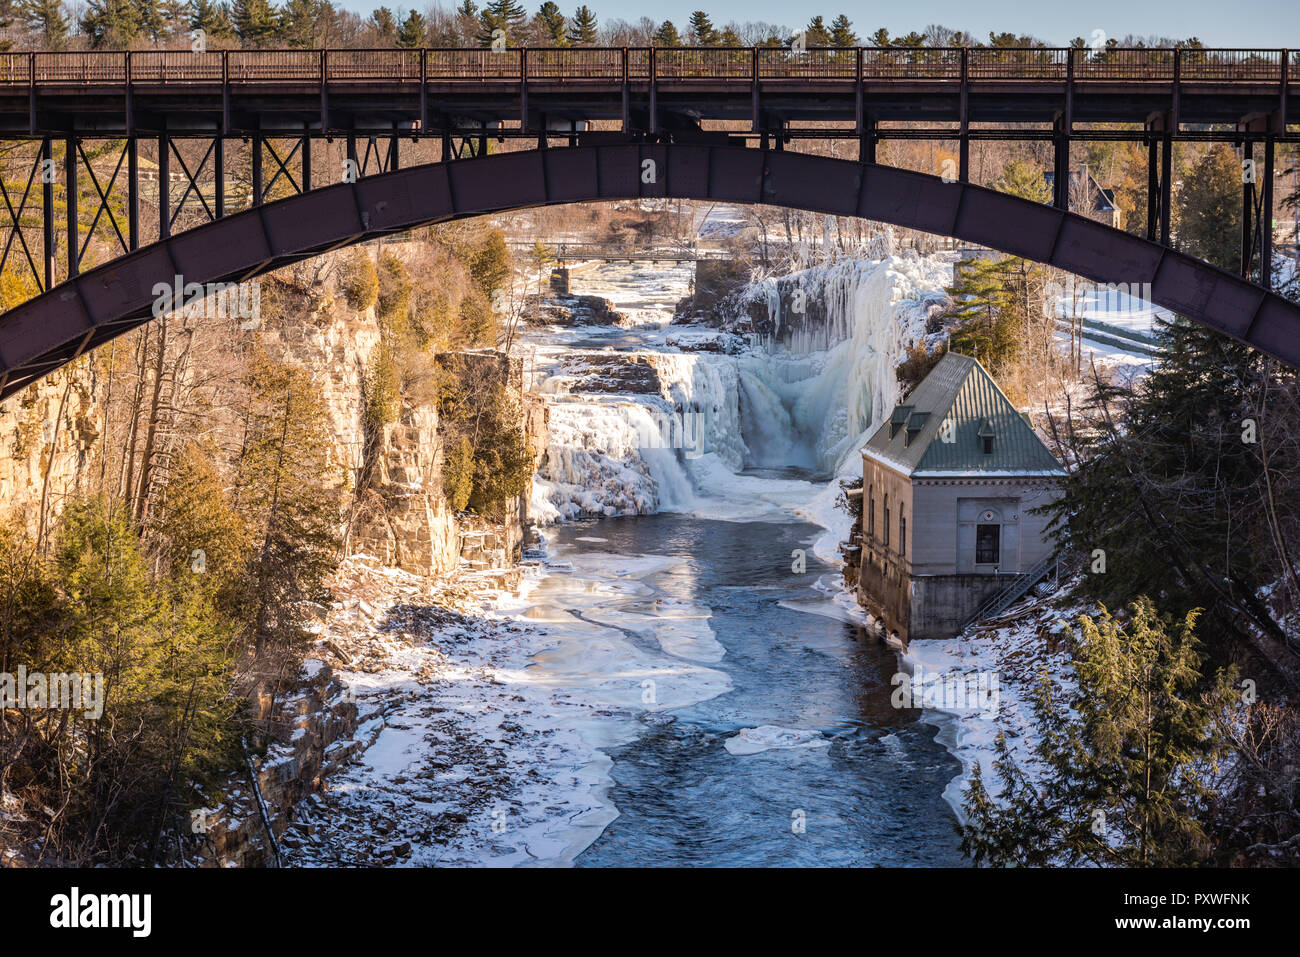 Iron bridge over Ausable River at Ausable Chasm, a 2 mile gorge in the Adirondacks of Upstate New York known as the Grand Canyon of the East. Stock Photo